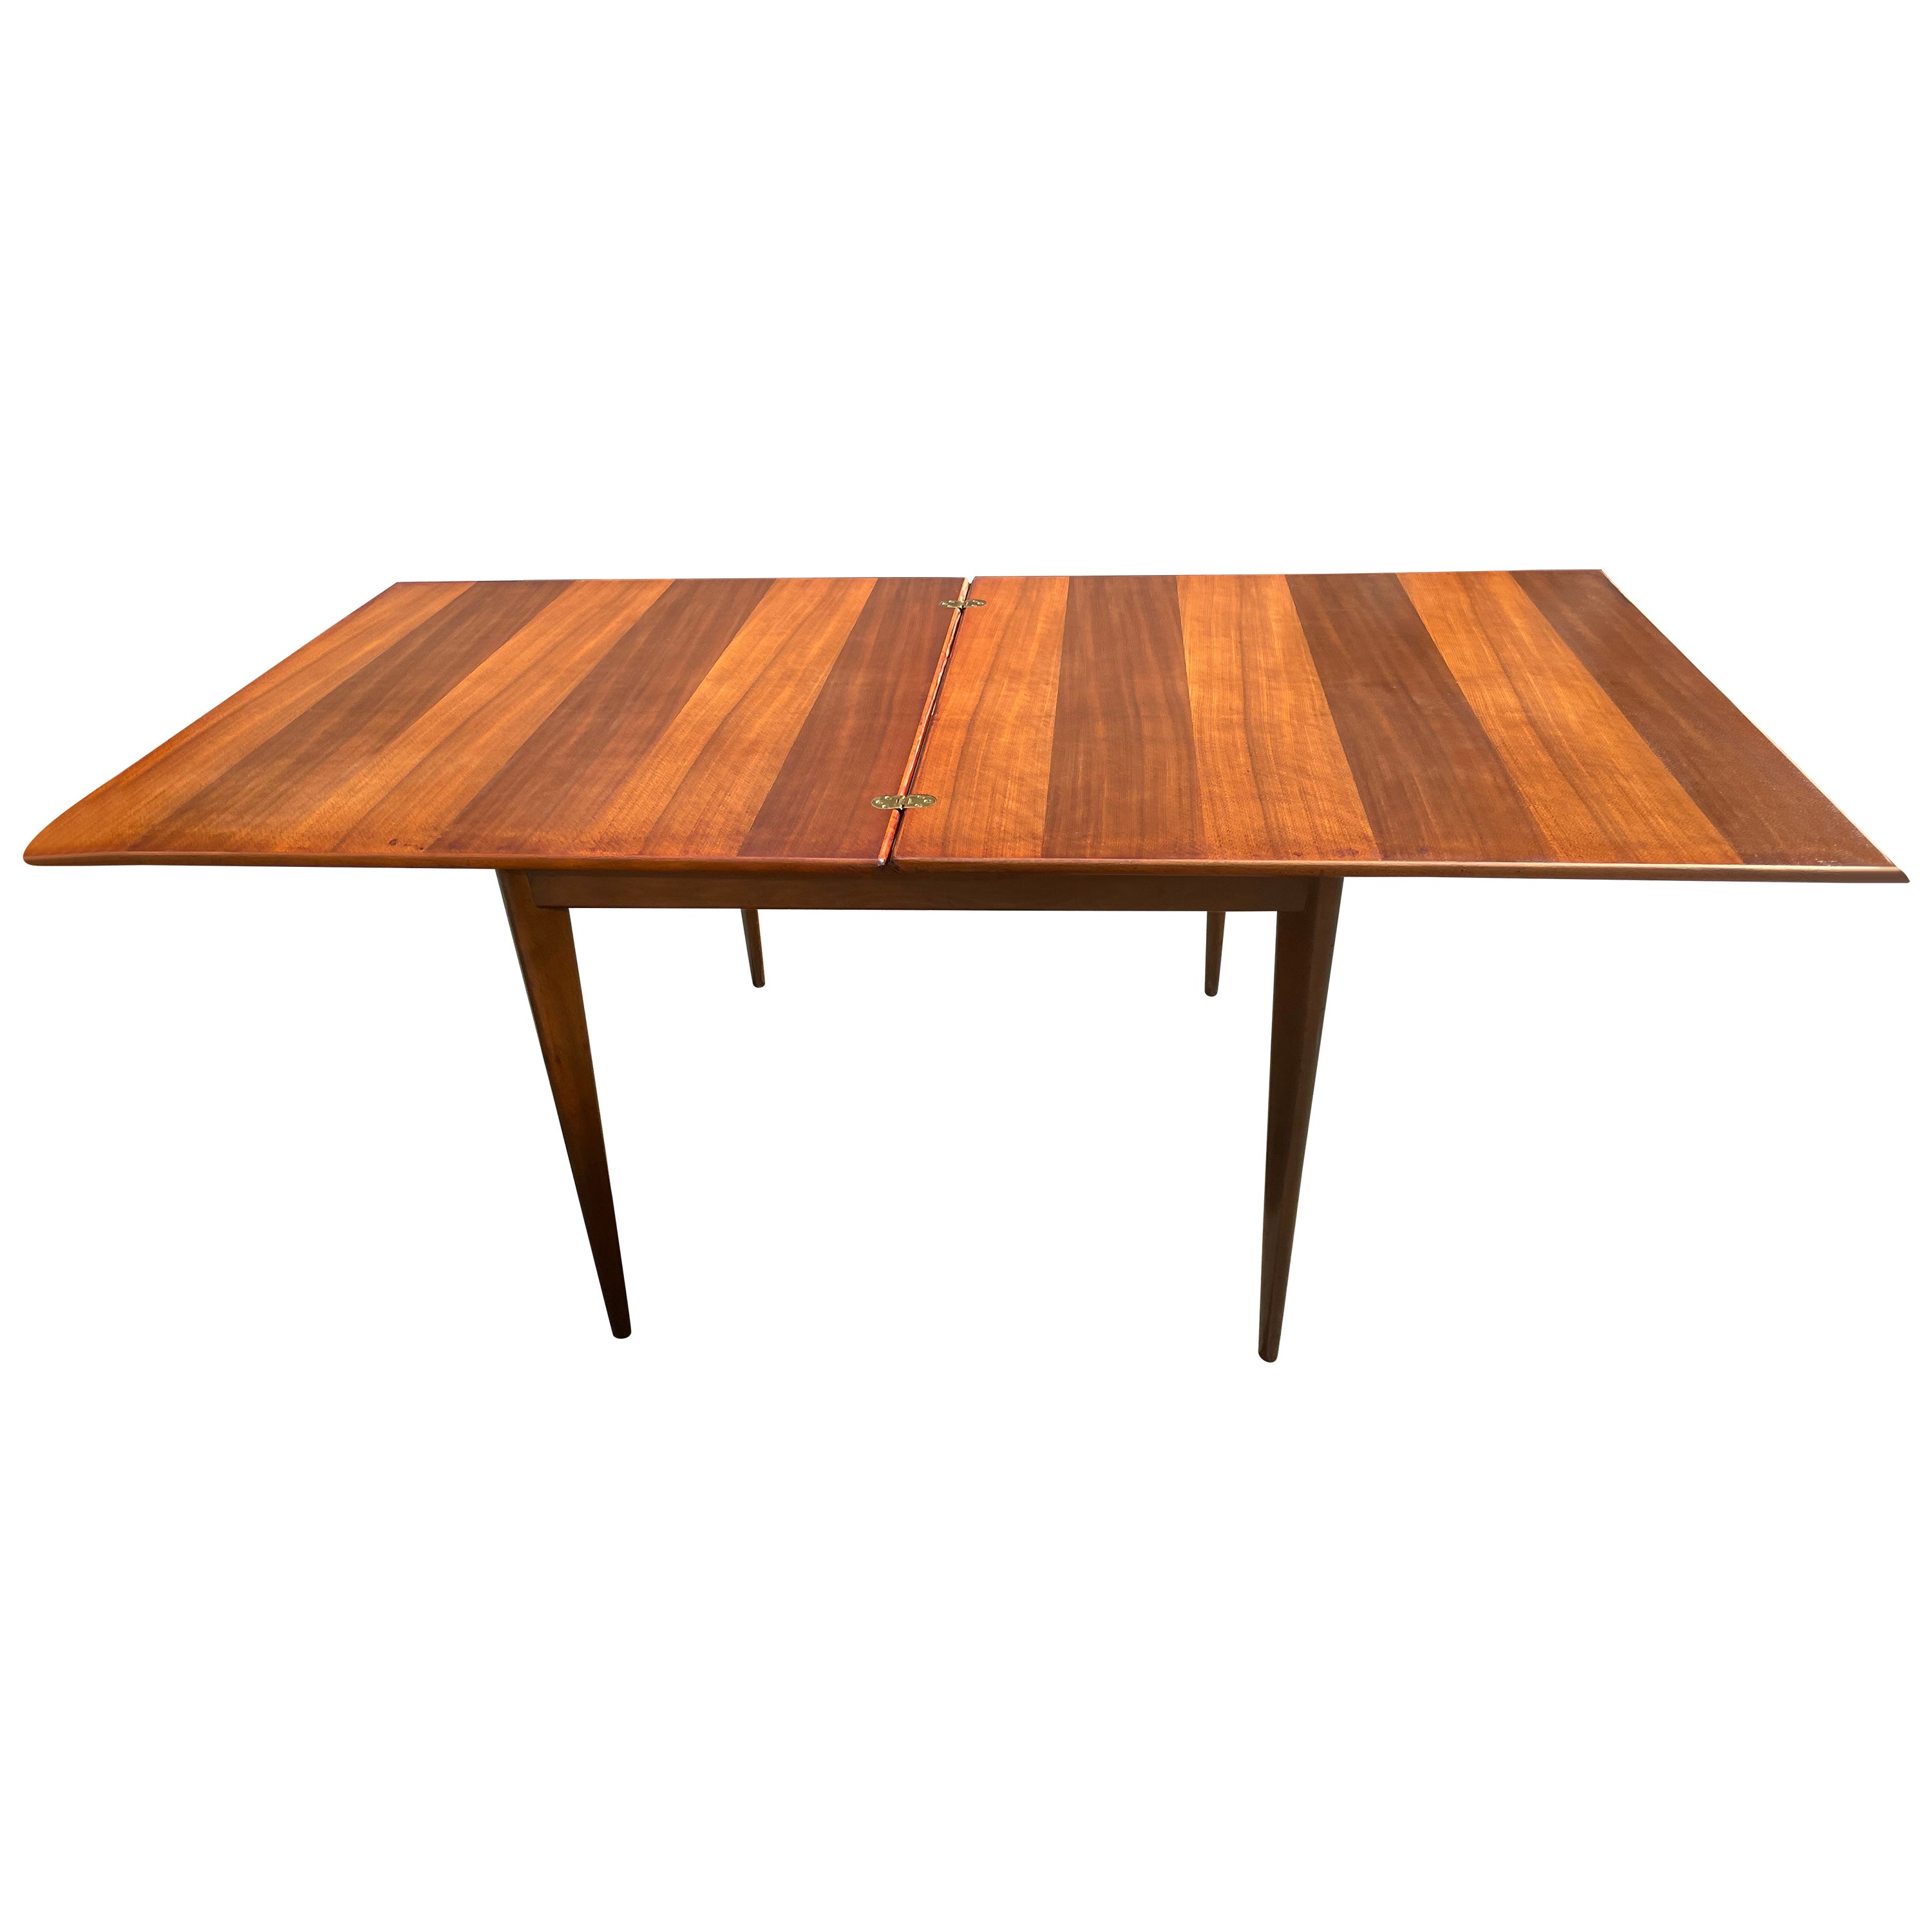 Nils Jonson Rosewood Fliptop Extendable Table with Brass Hinges For Sale